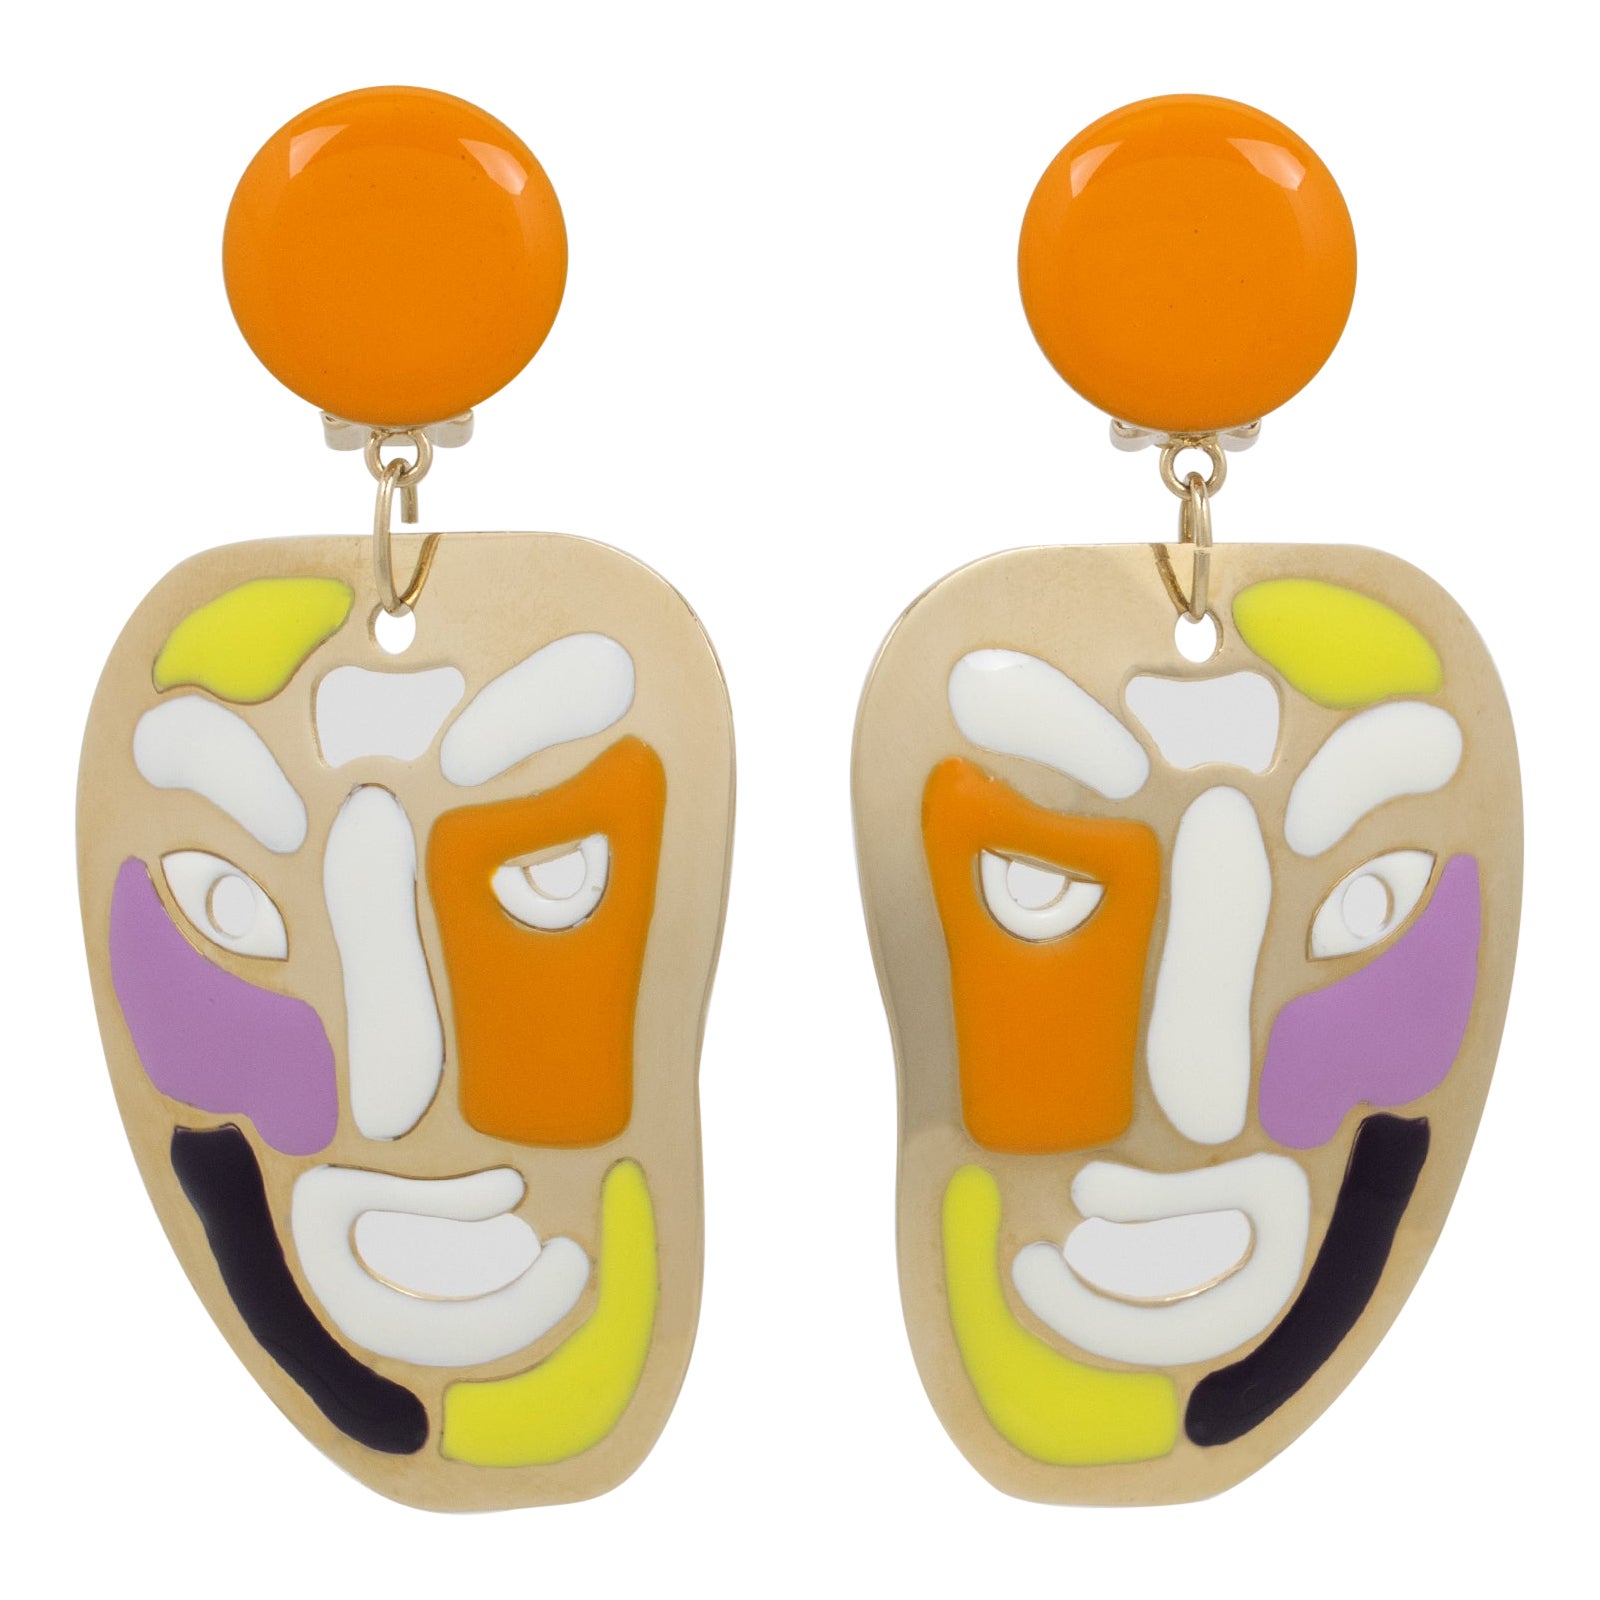 Missoni Italy Gilt Metal Clip Earrings with Multicolor Iconic Smiling Face